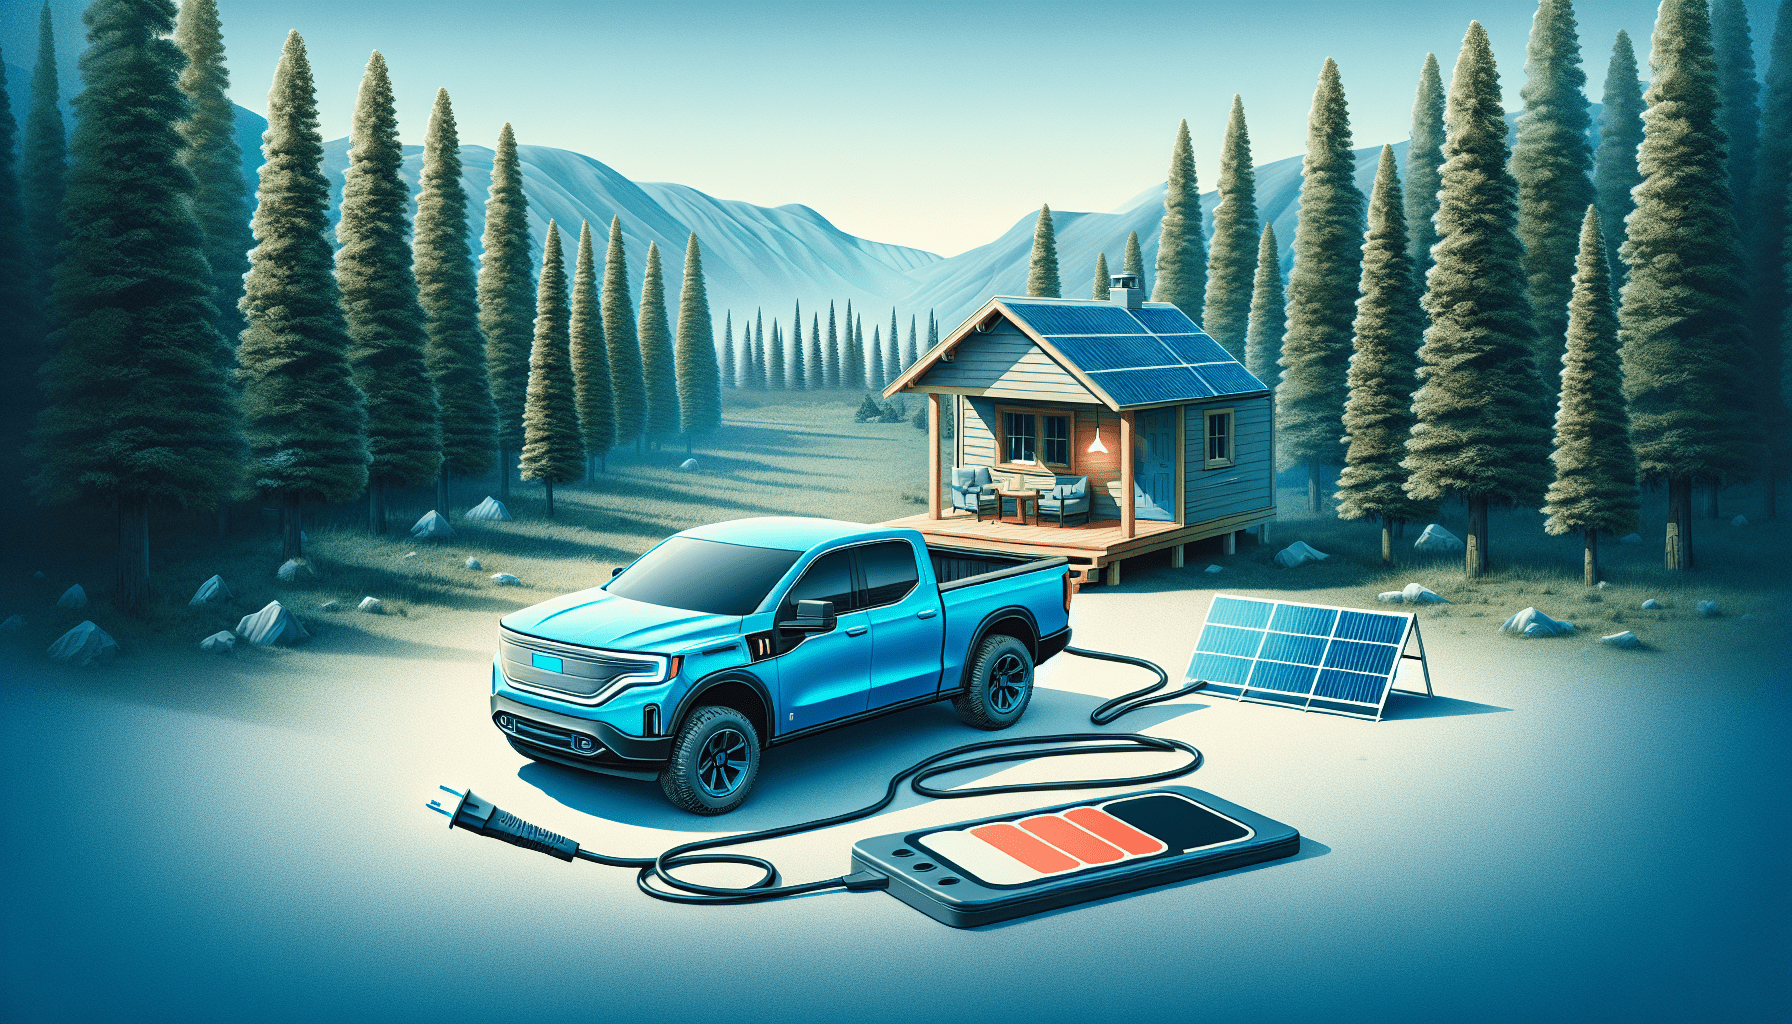 Can The Ford Lightning Be Used As A Generator?